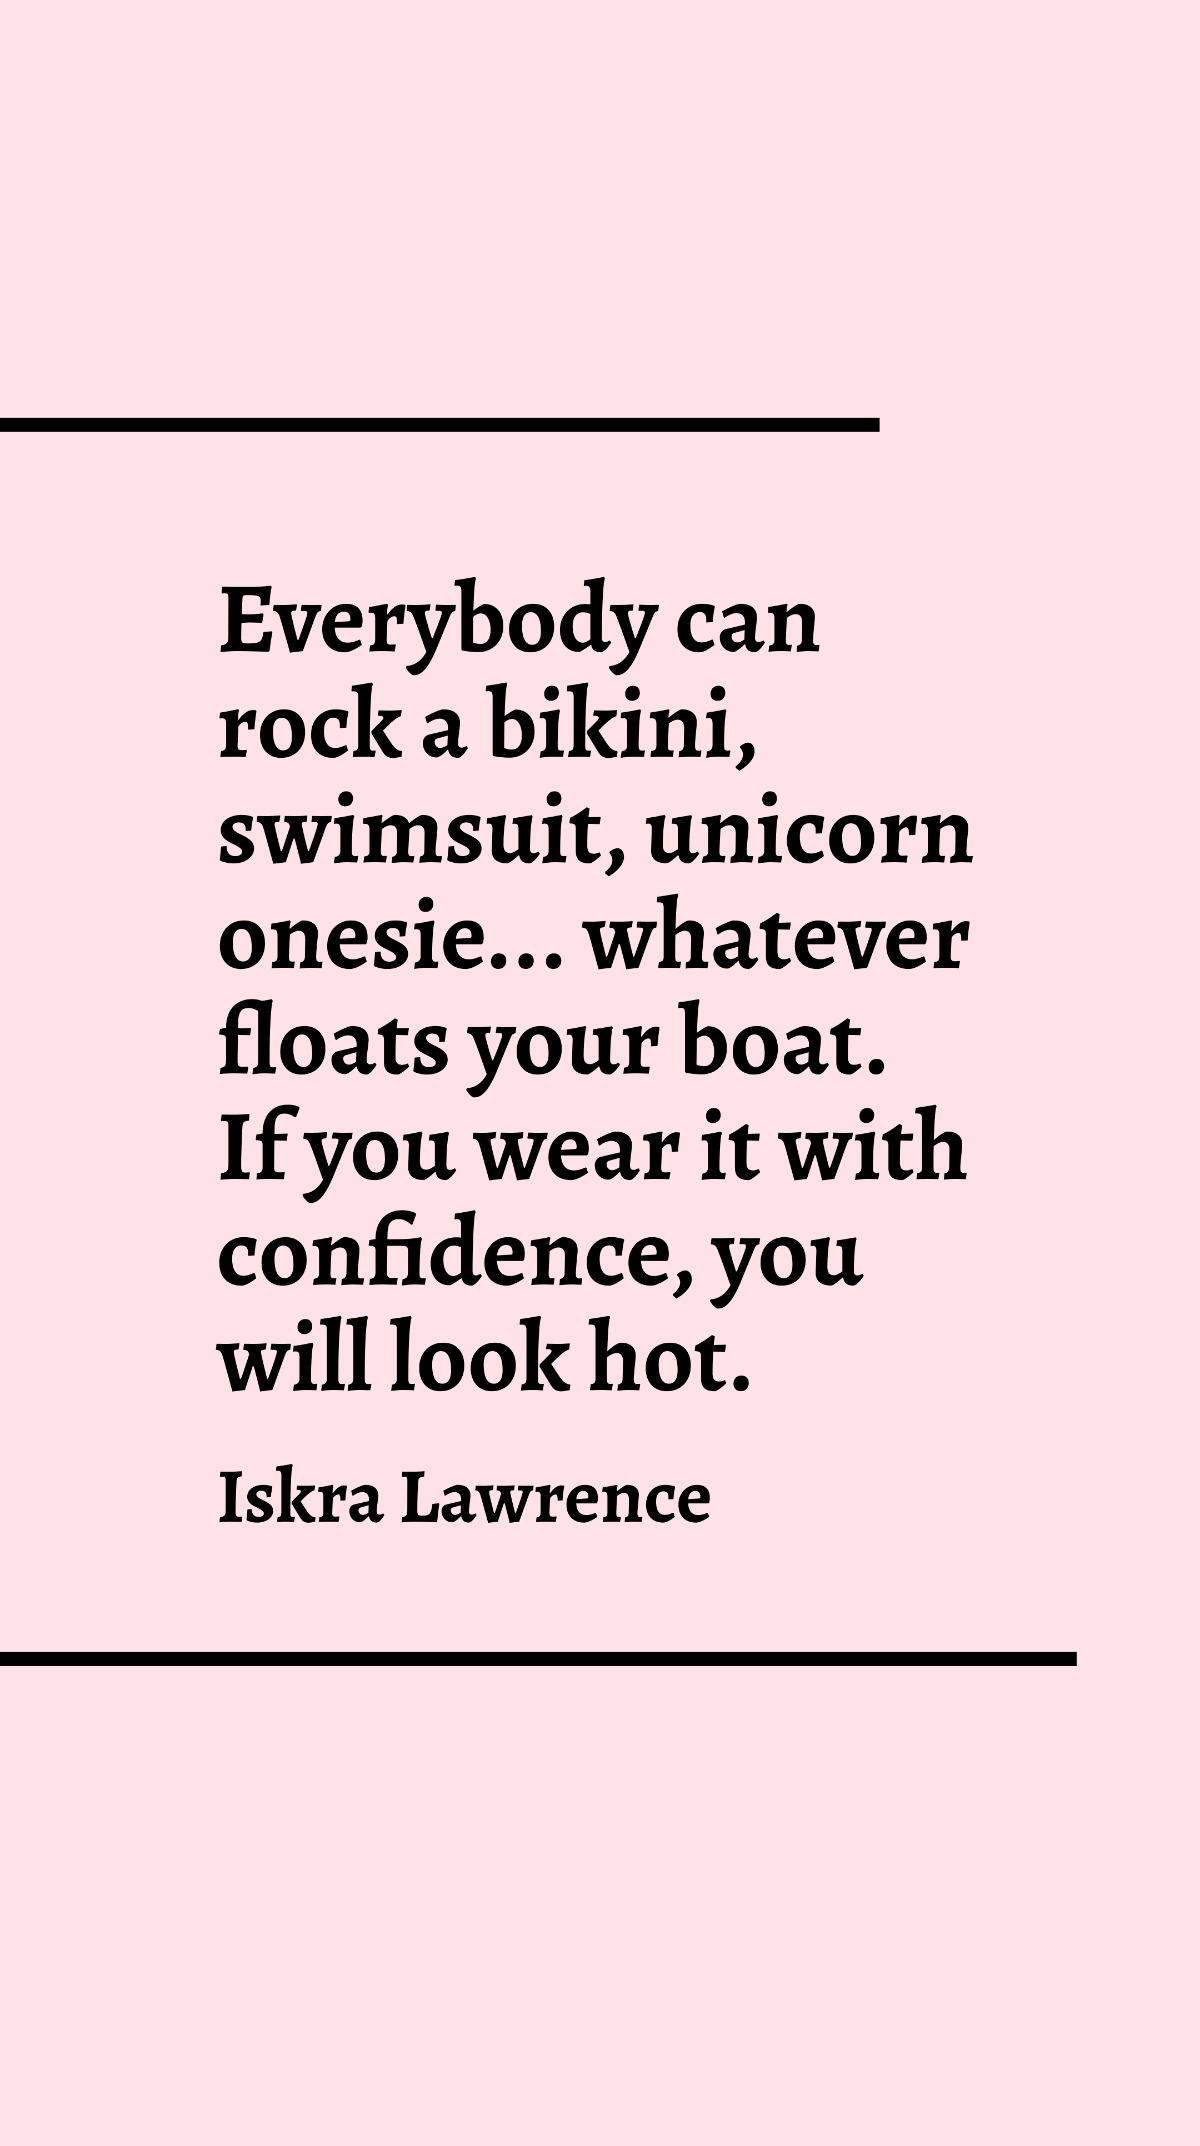 Free Iskra Lawrence - Everybody can rock a bikini, swimsuit, unicorn onesie... whatever floats your boat. If you wear it with confidence, you will look hot.  Template